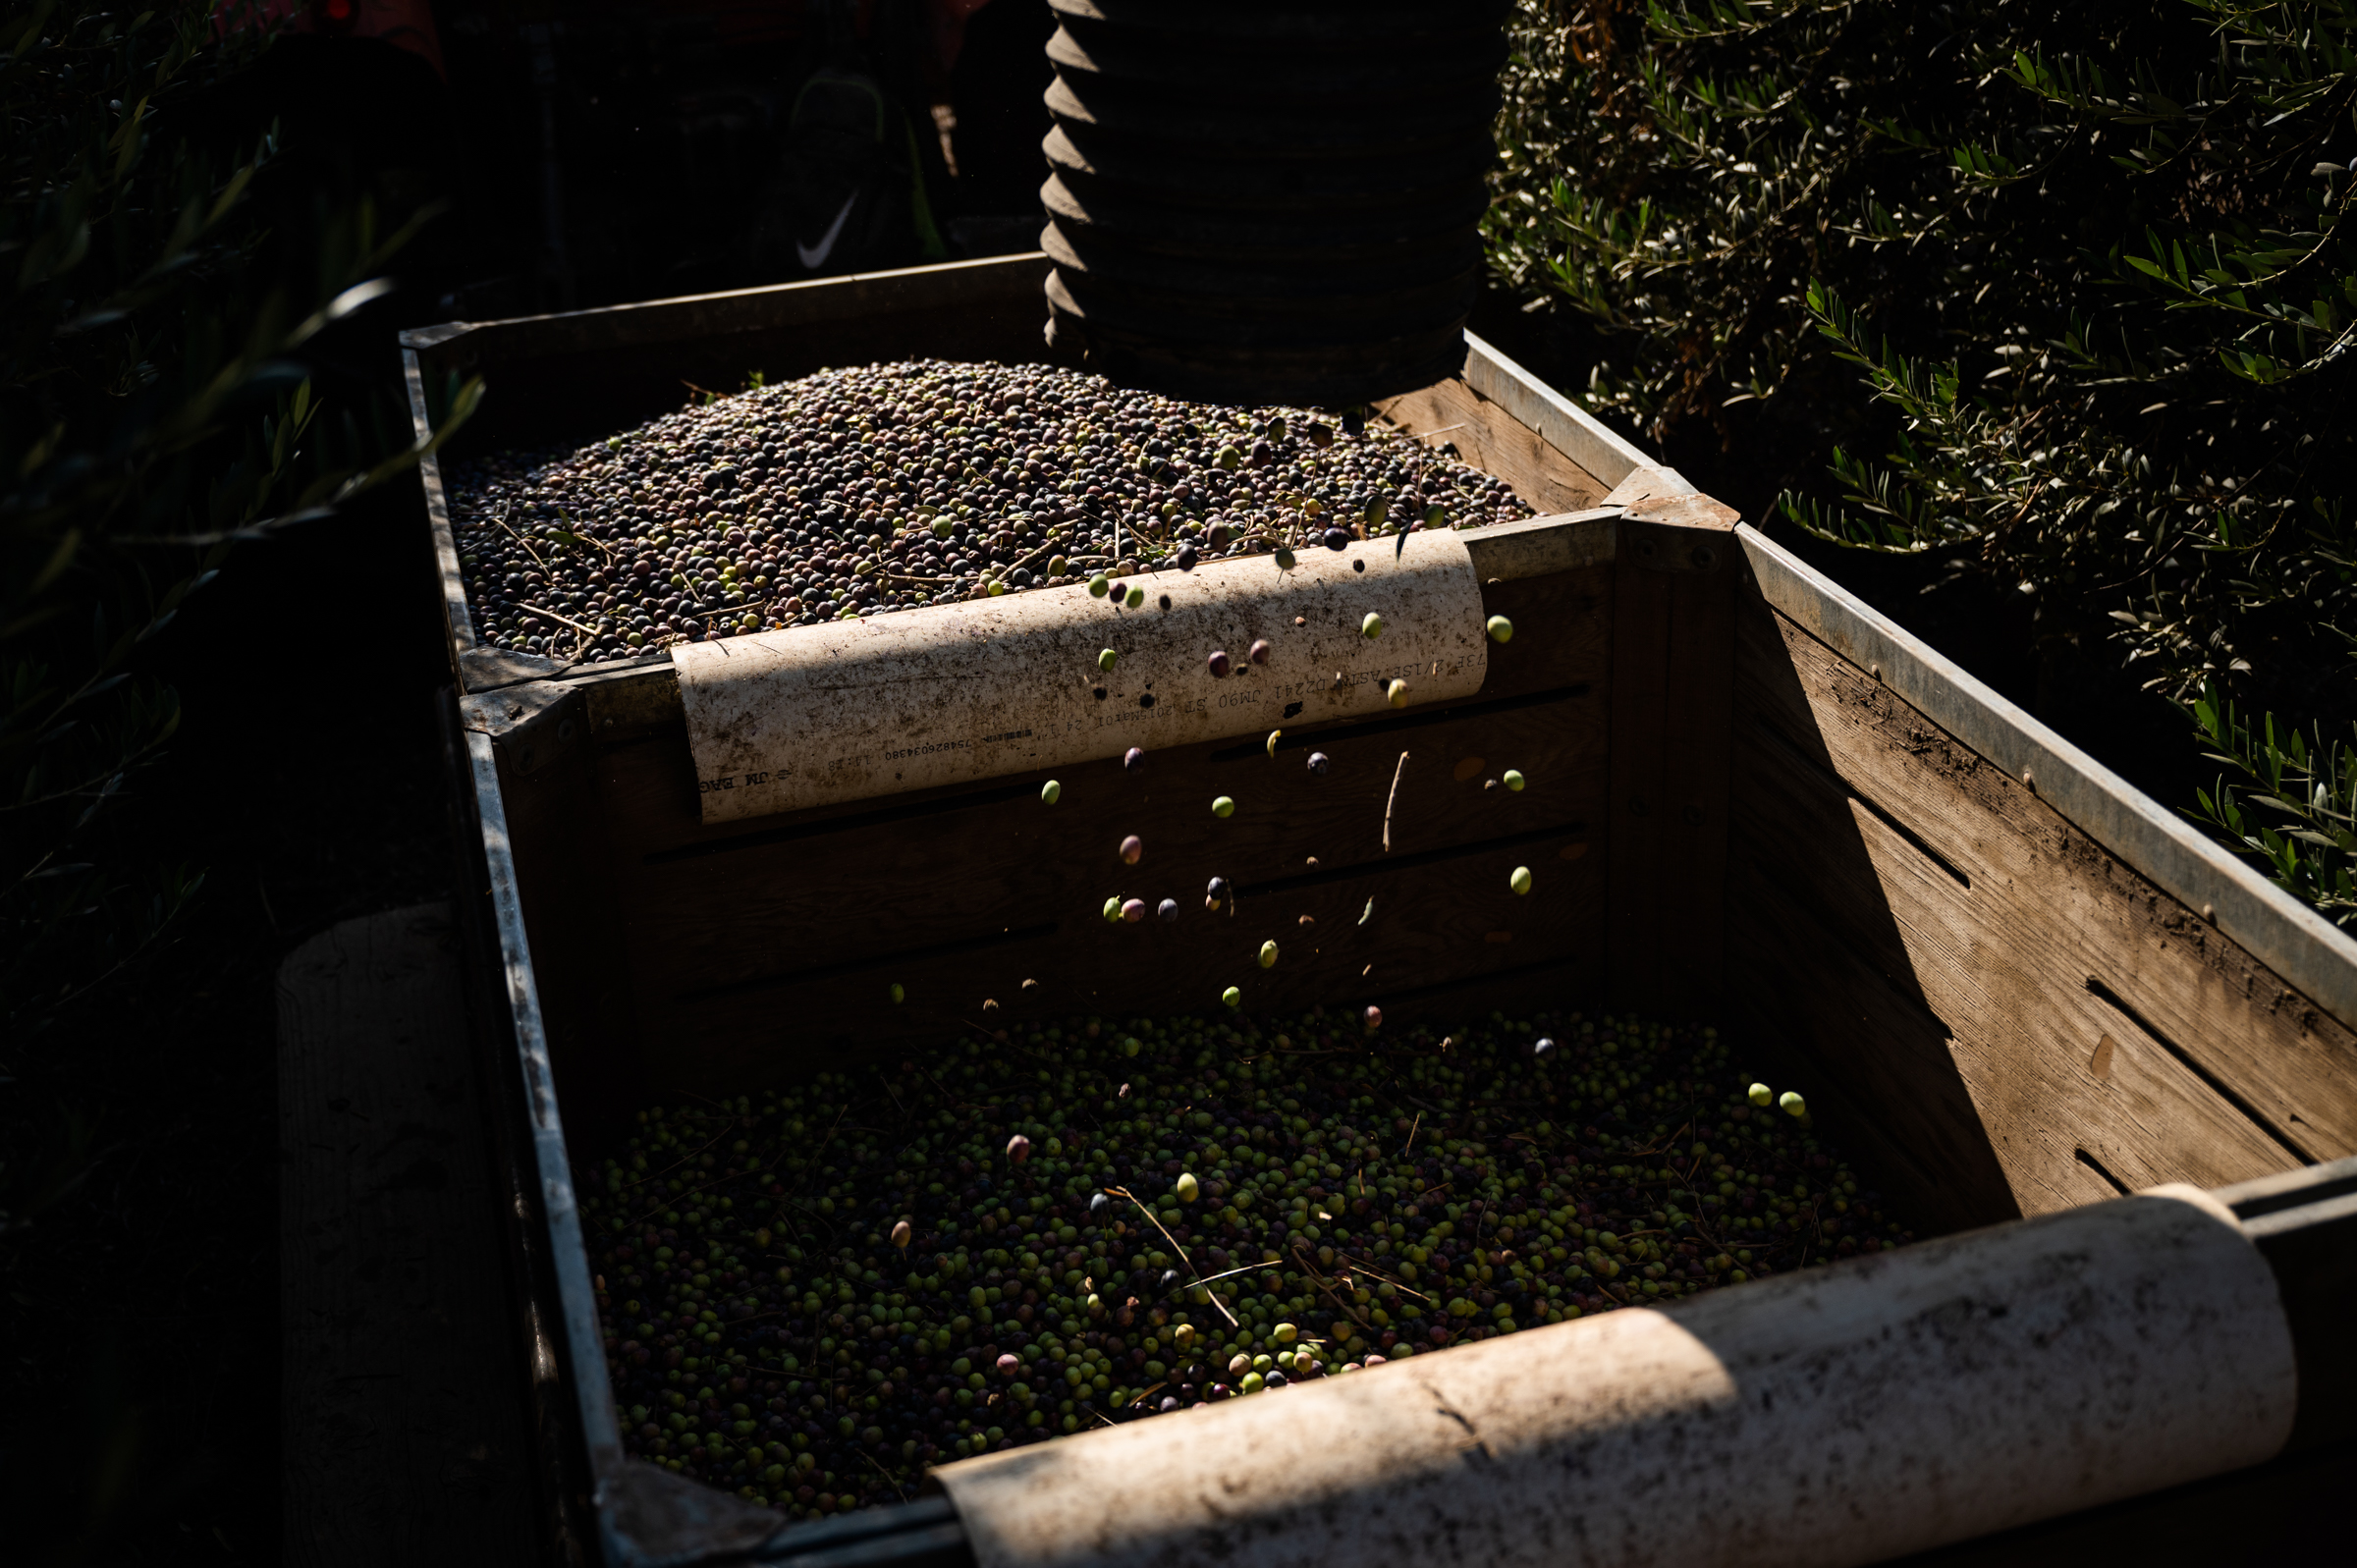 Freshly harvested olives are dumped from the harvester's conveyor into bins